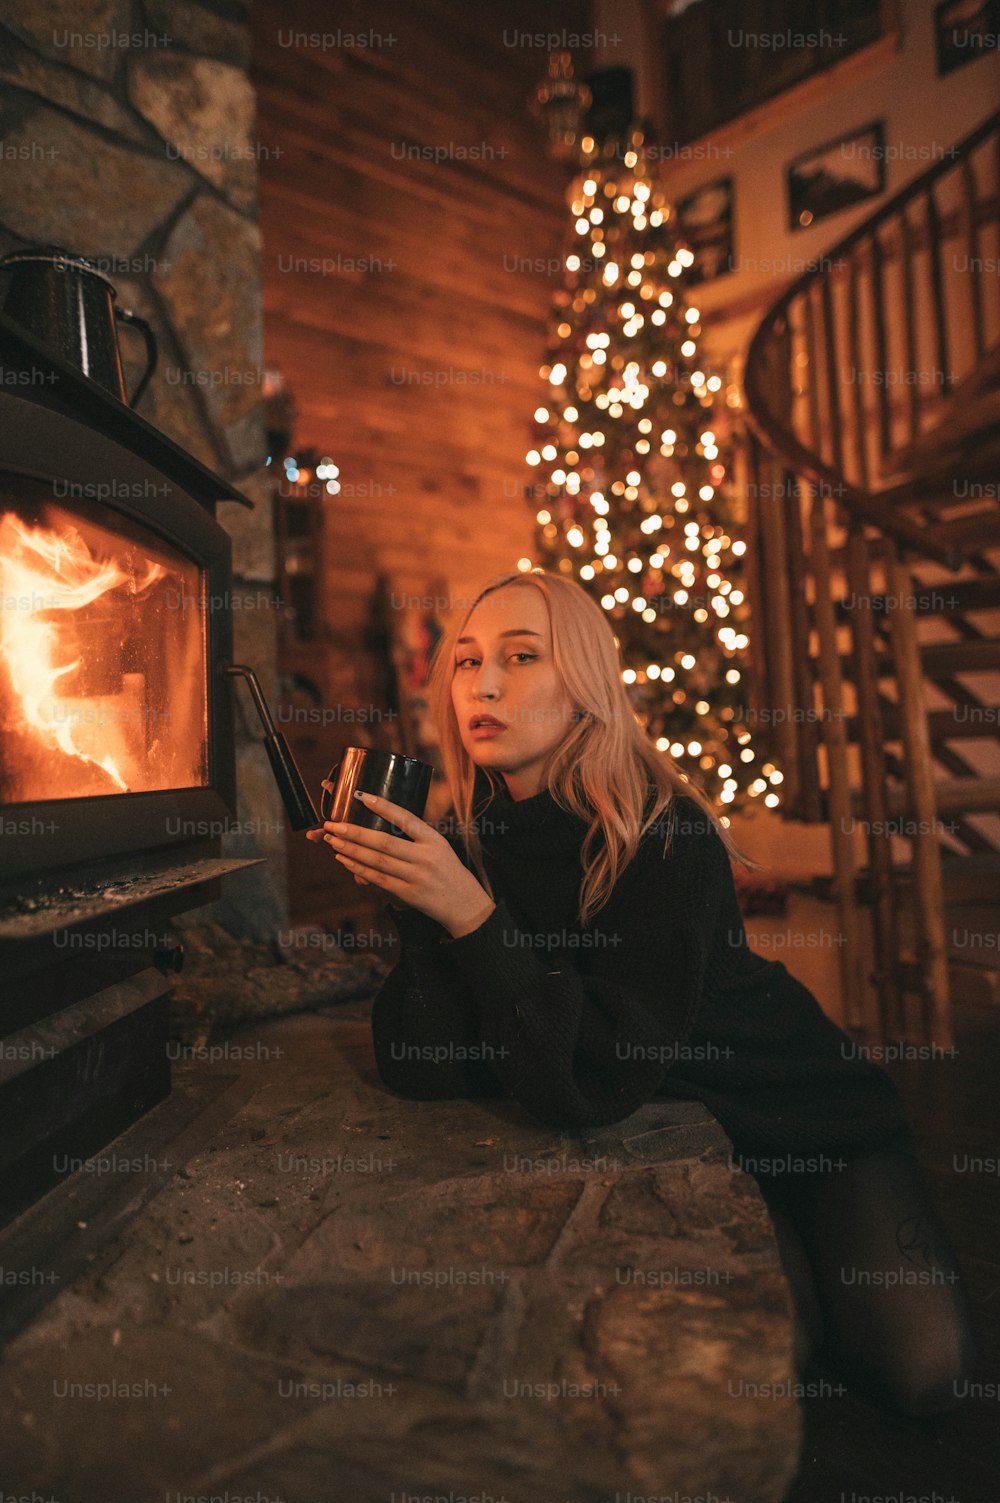 a woman sitting in front of a fireplace holding a glass of wine